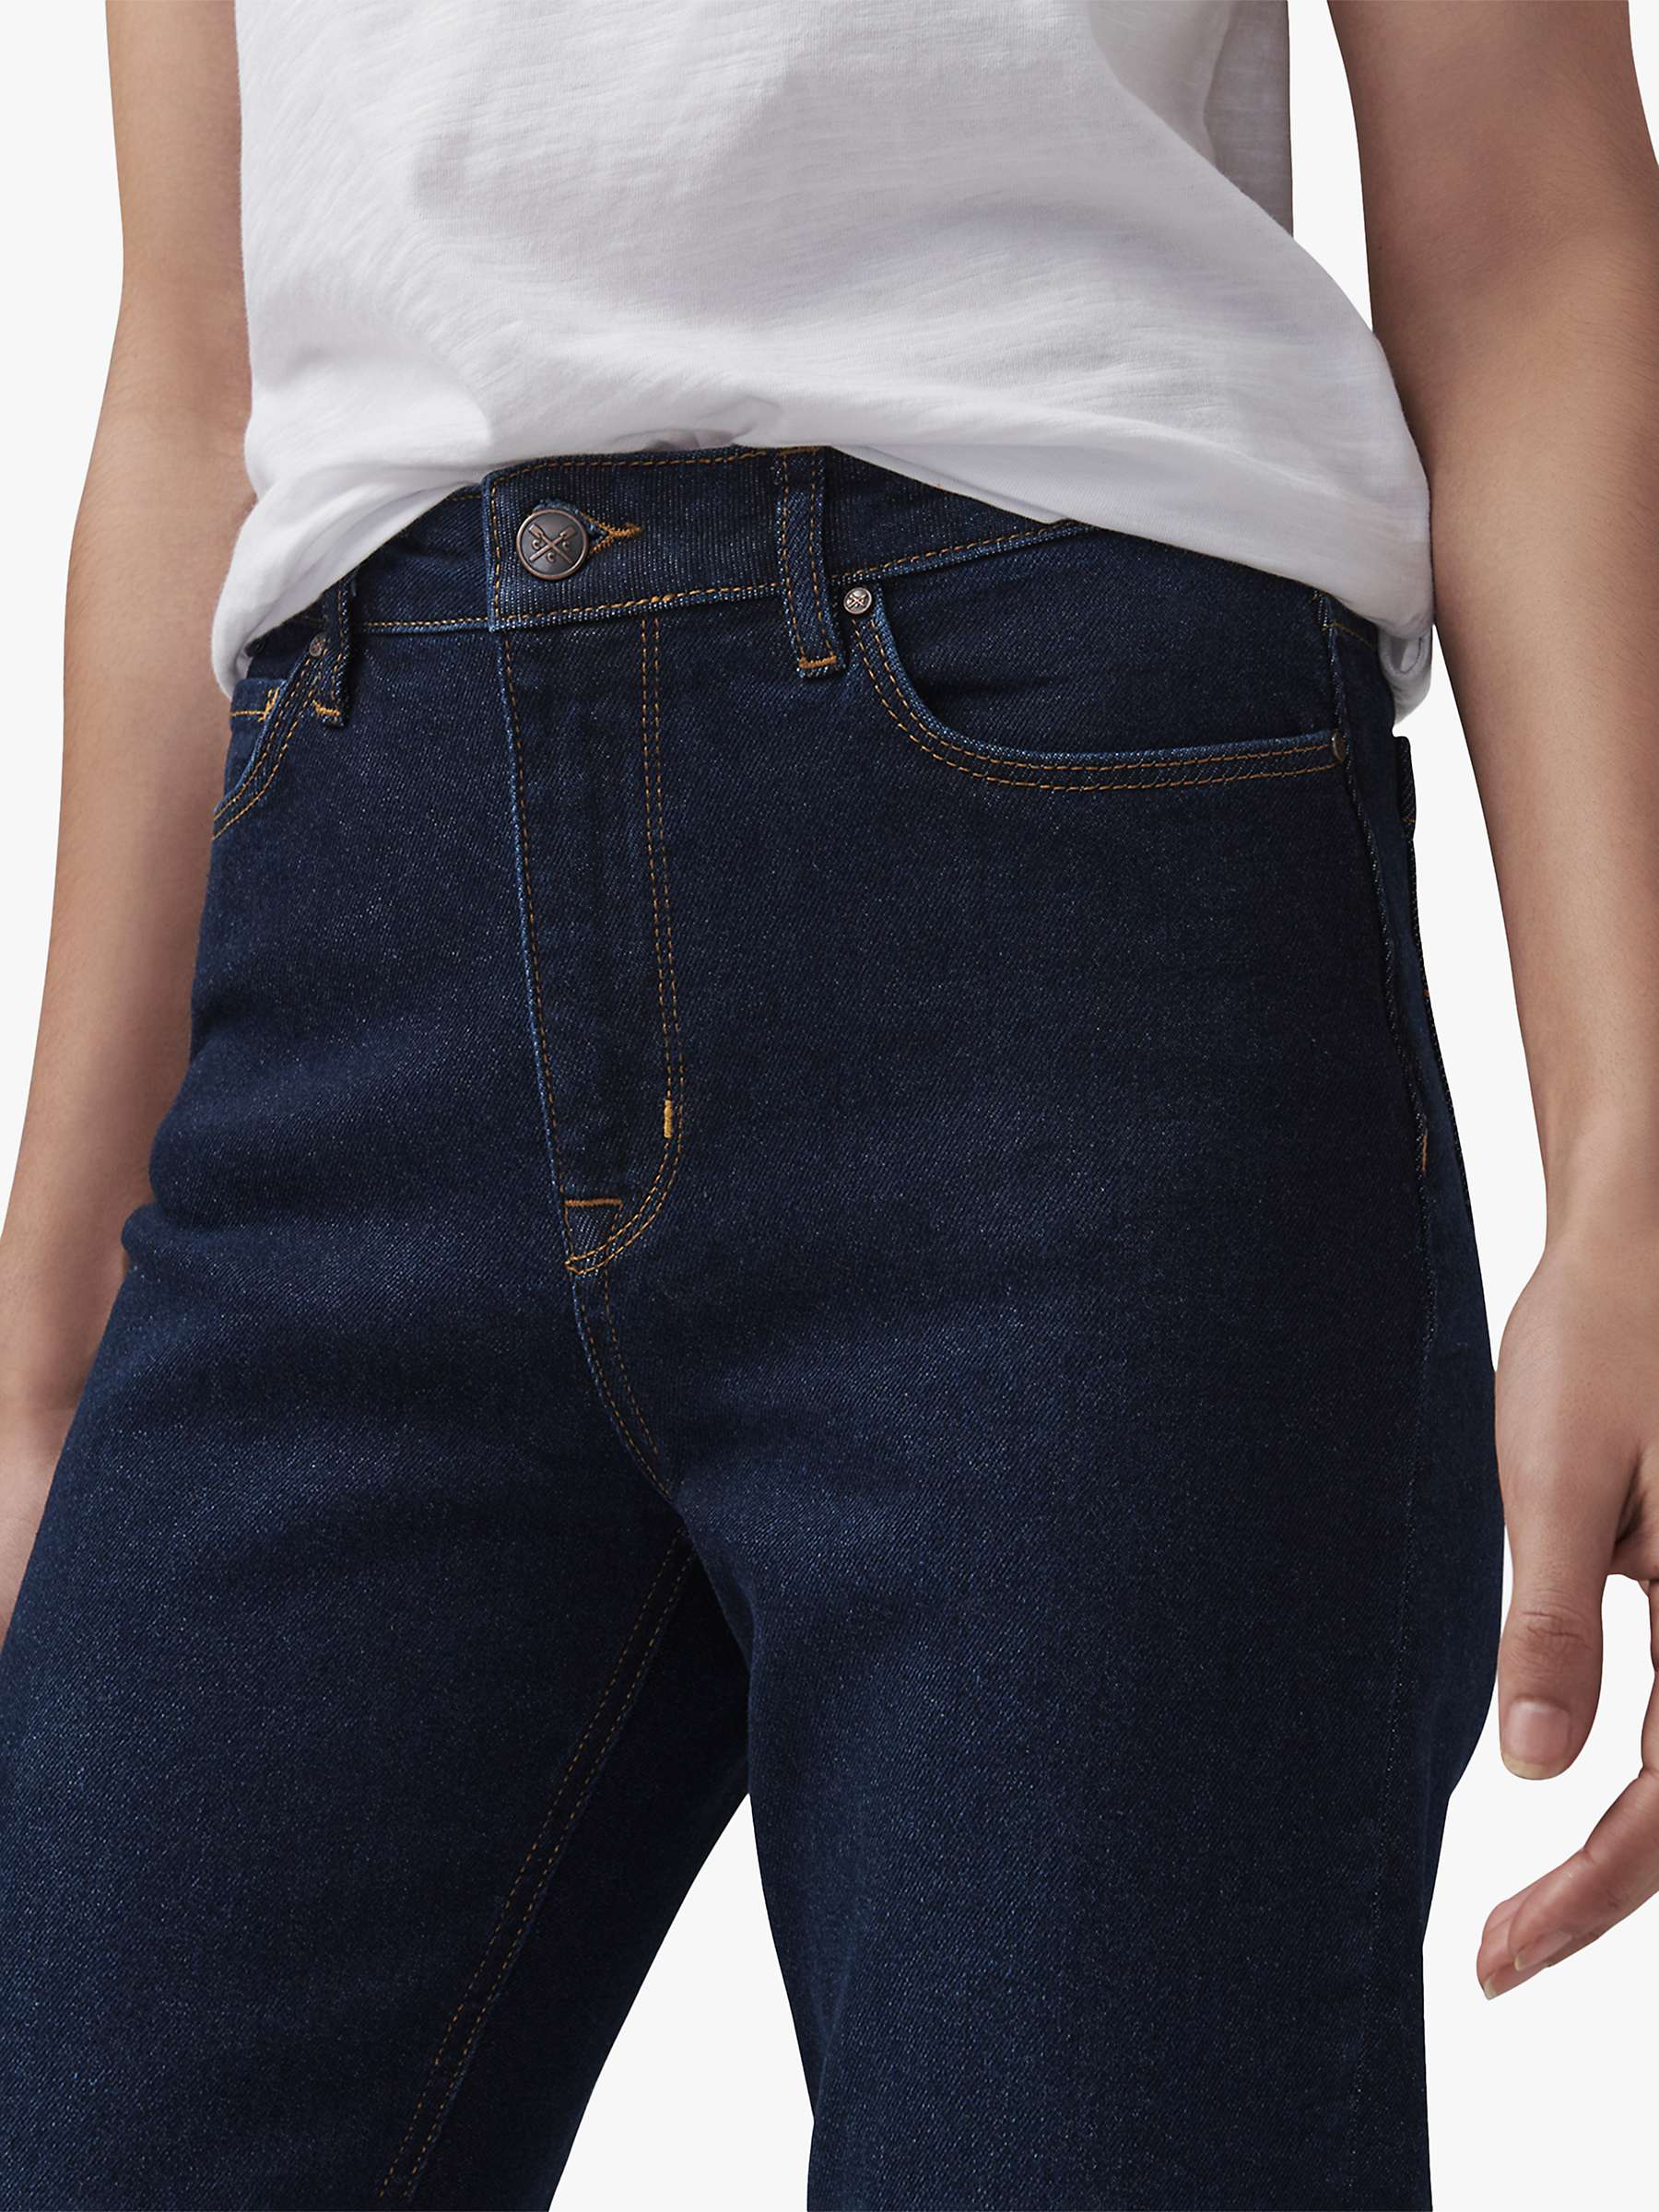 Buy Crew Clothing Girlfriend Jeans Online at johnlewis.com